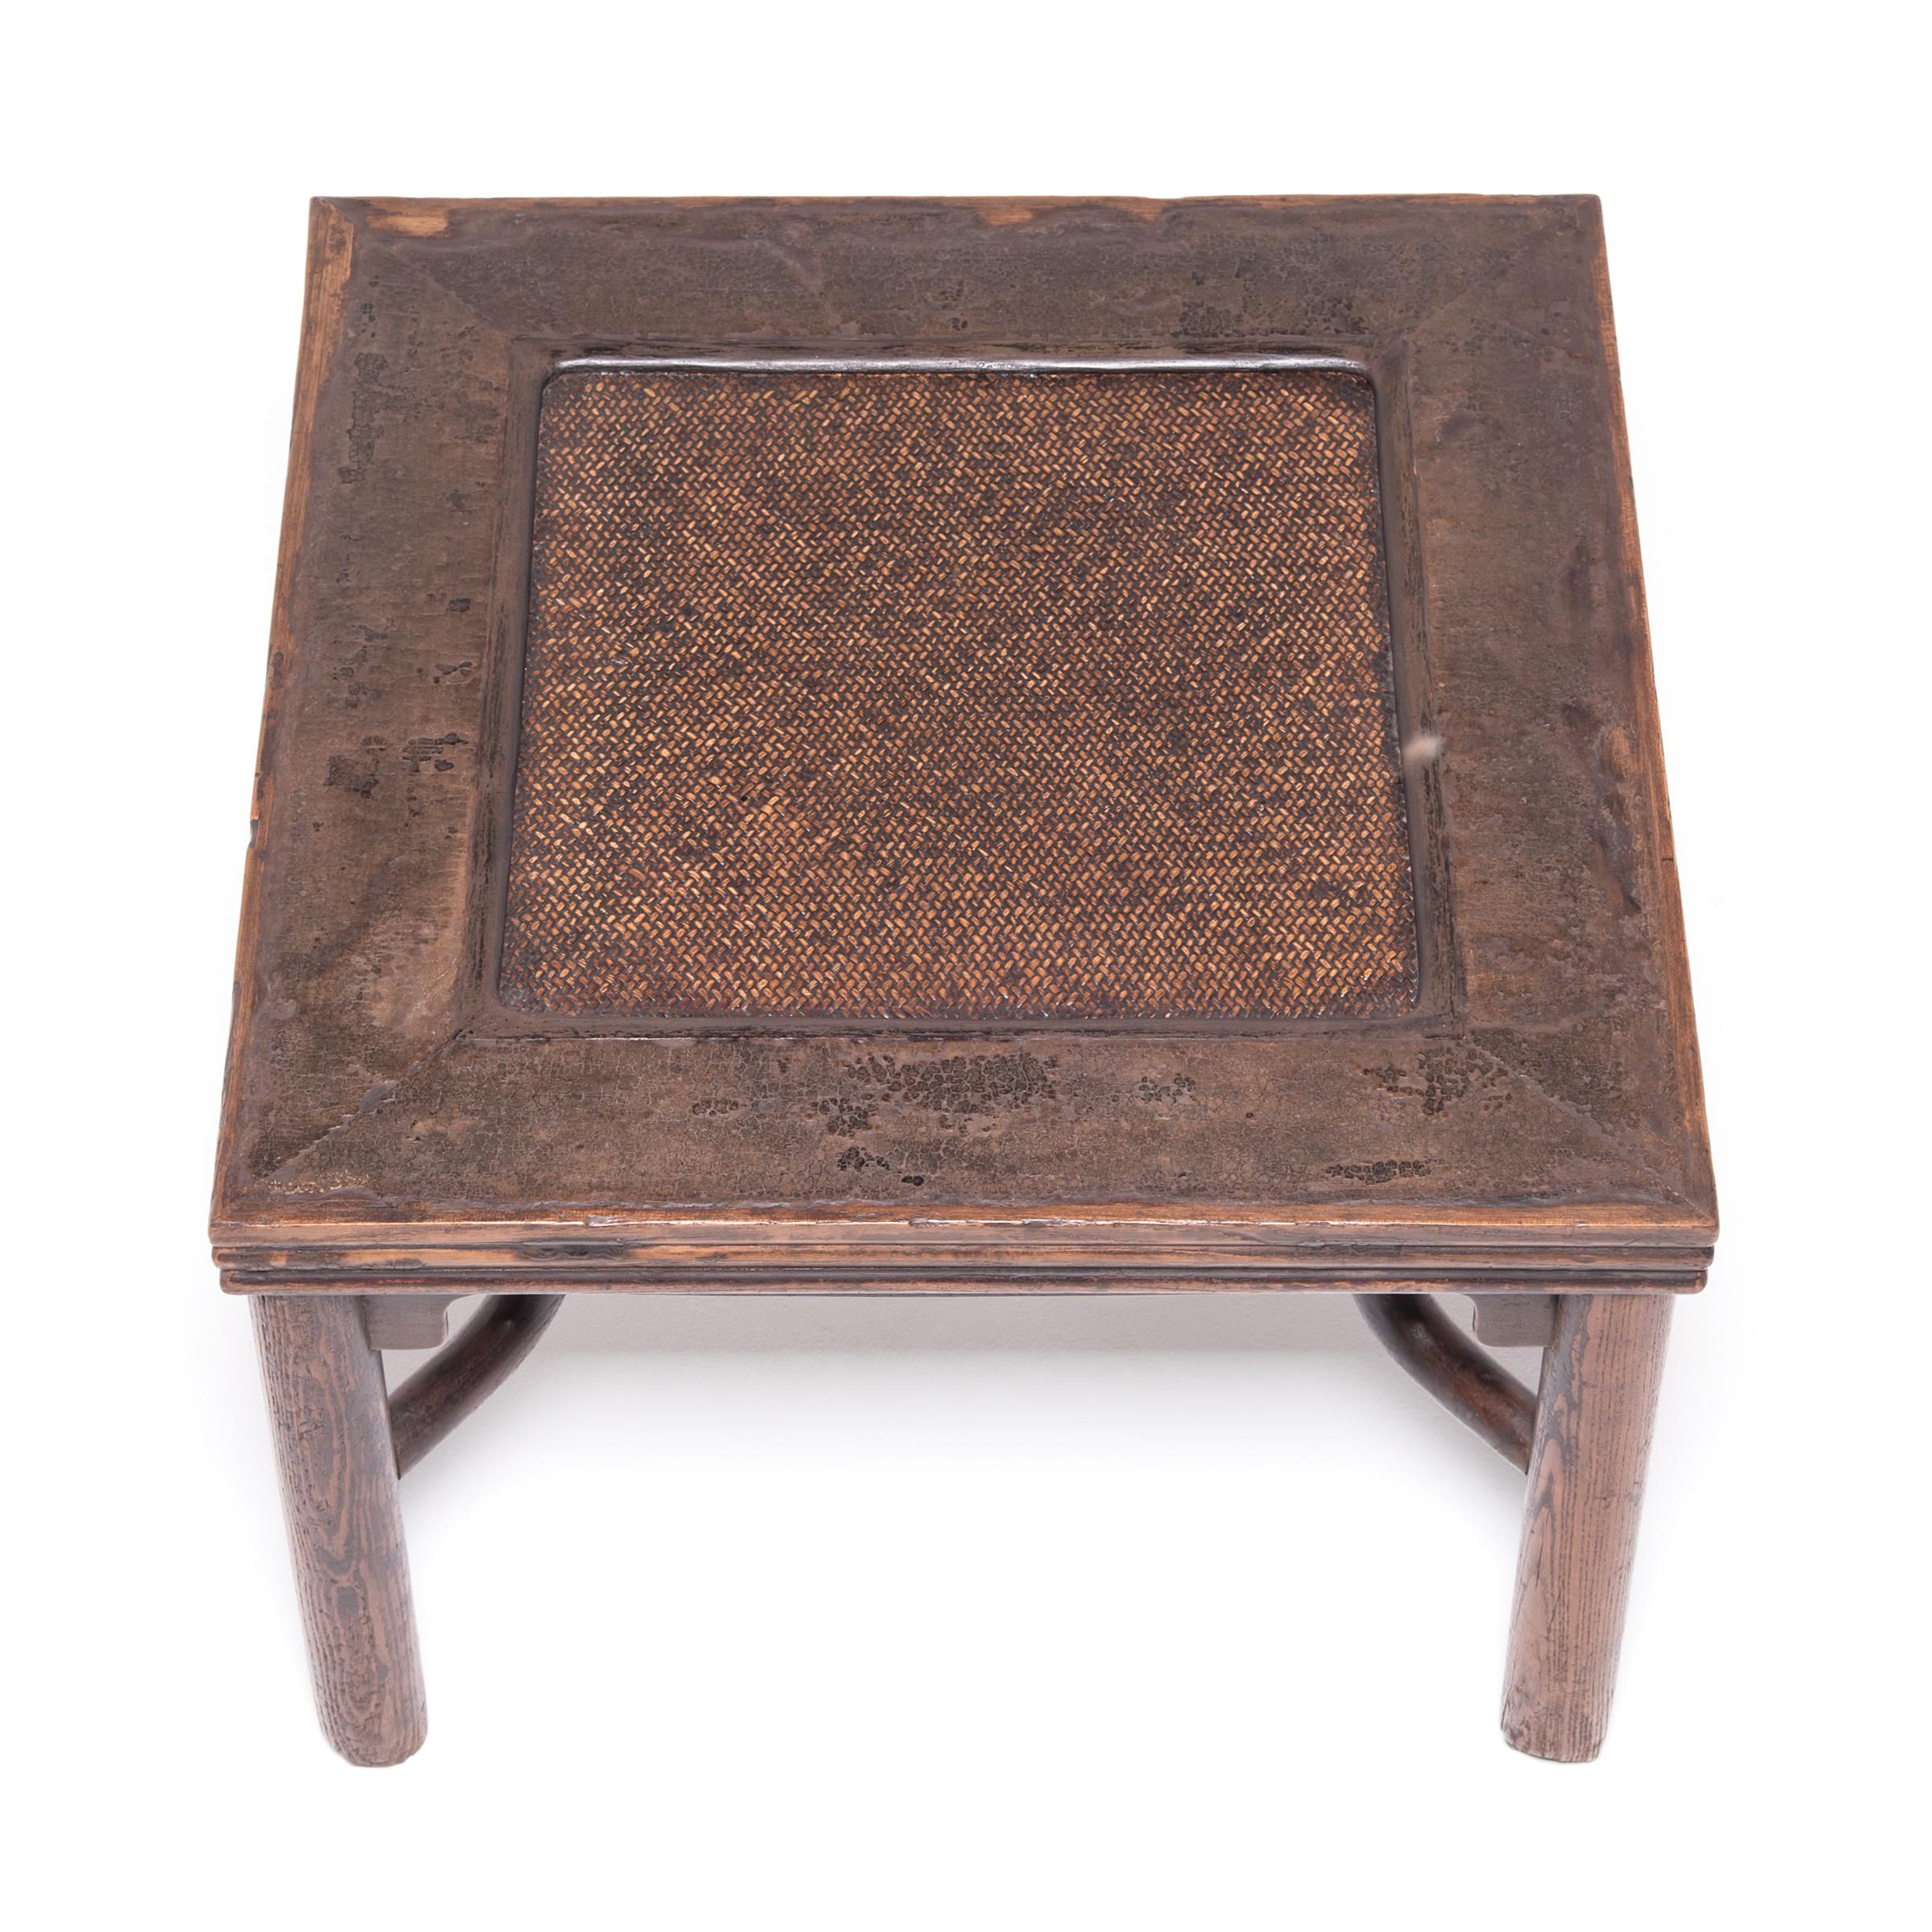 Chinese Woven Top Fang Deng Stool, c. 1900 In Good Condition For Sale In Chicago, IL